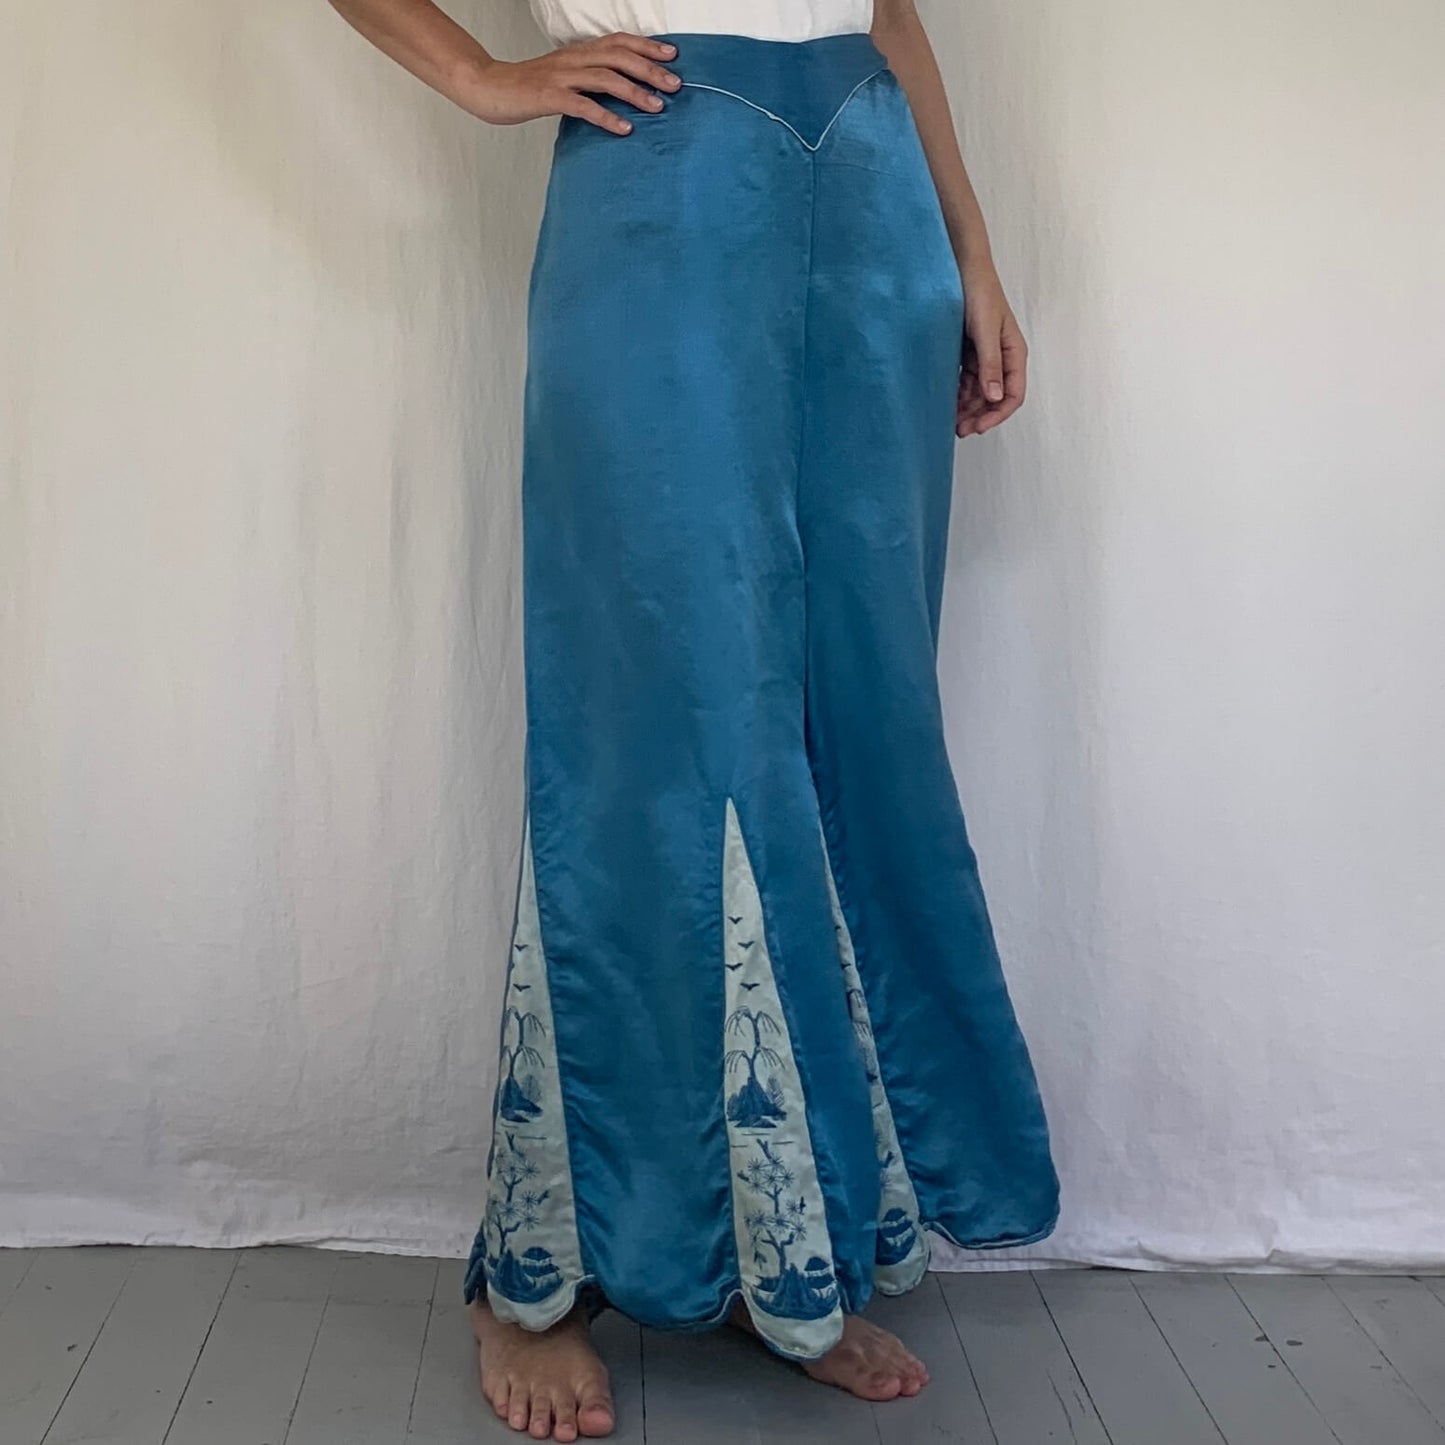 additional view of the blue 1920s pants